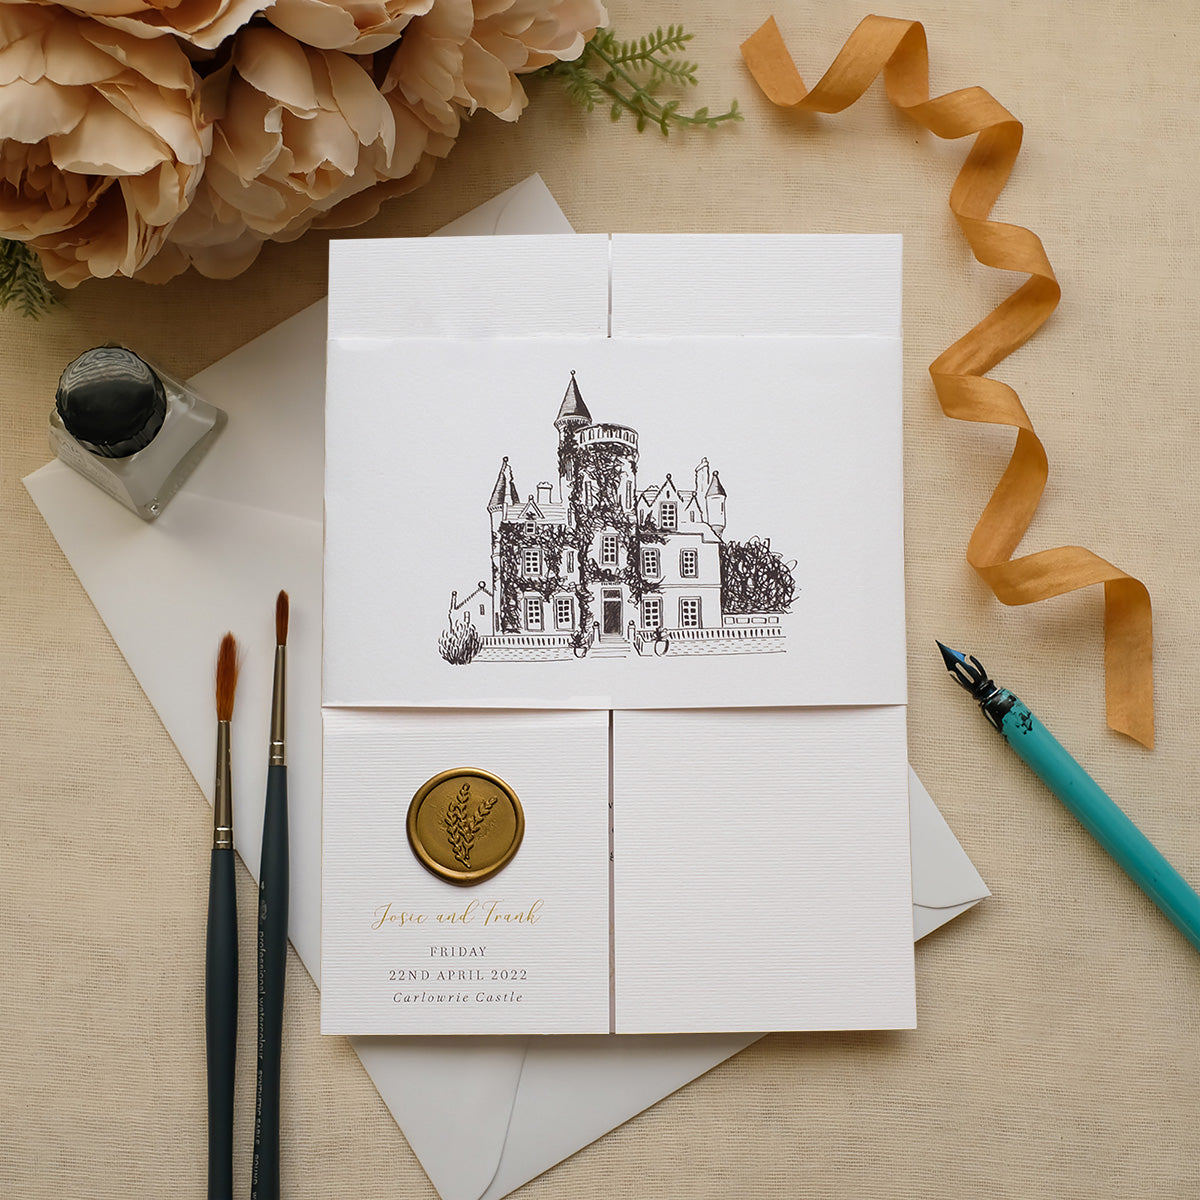 Castle Invitation With Gold Wax Seal, Venue Illustration and Belly Band